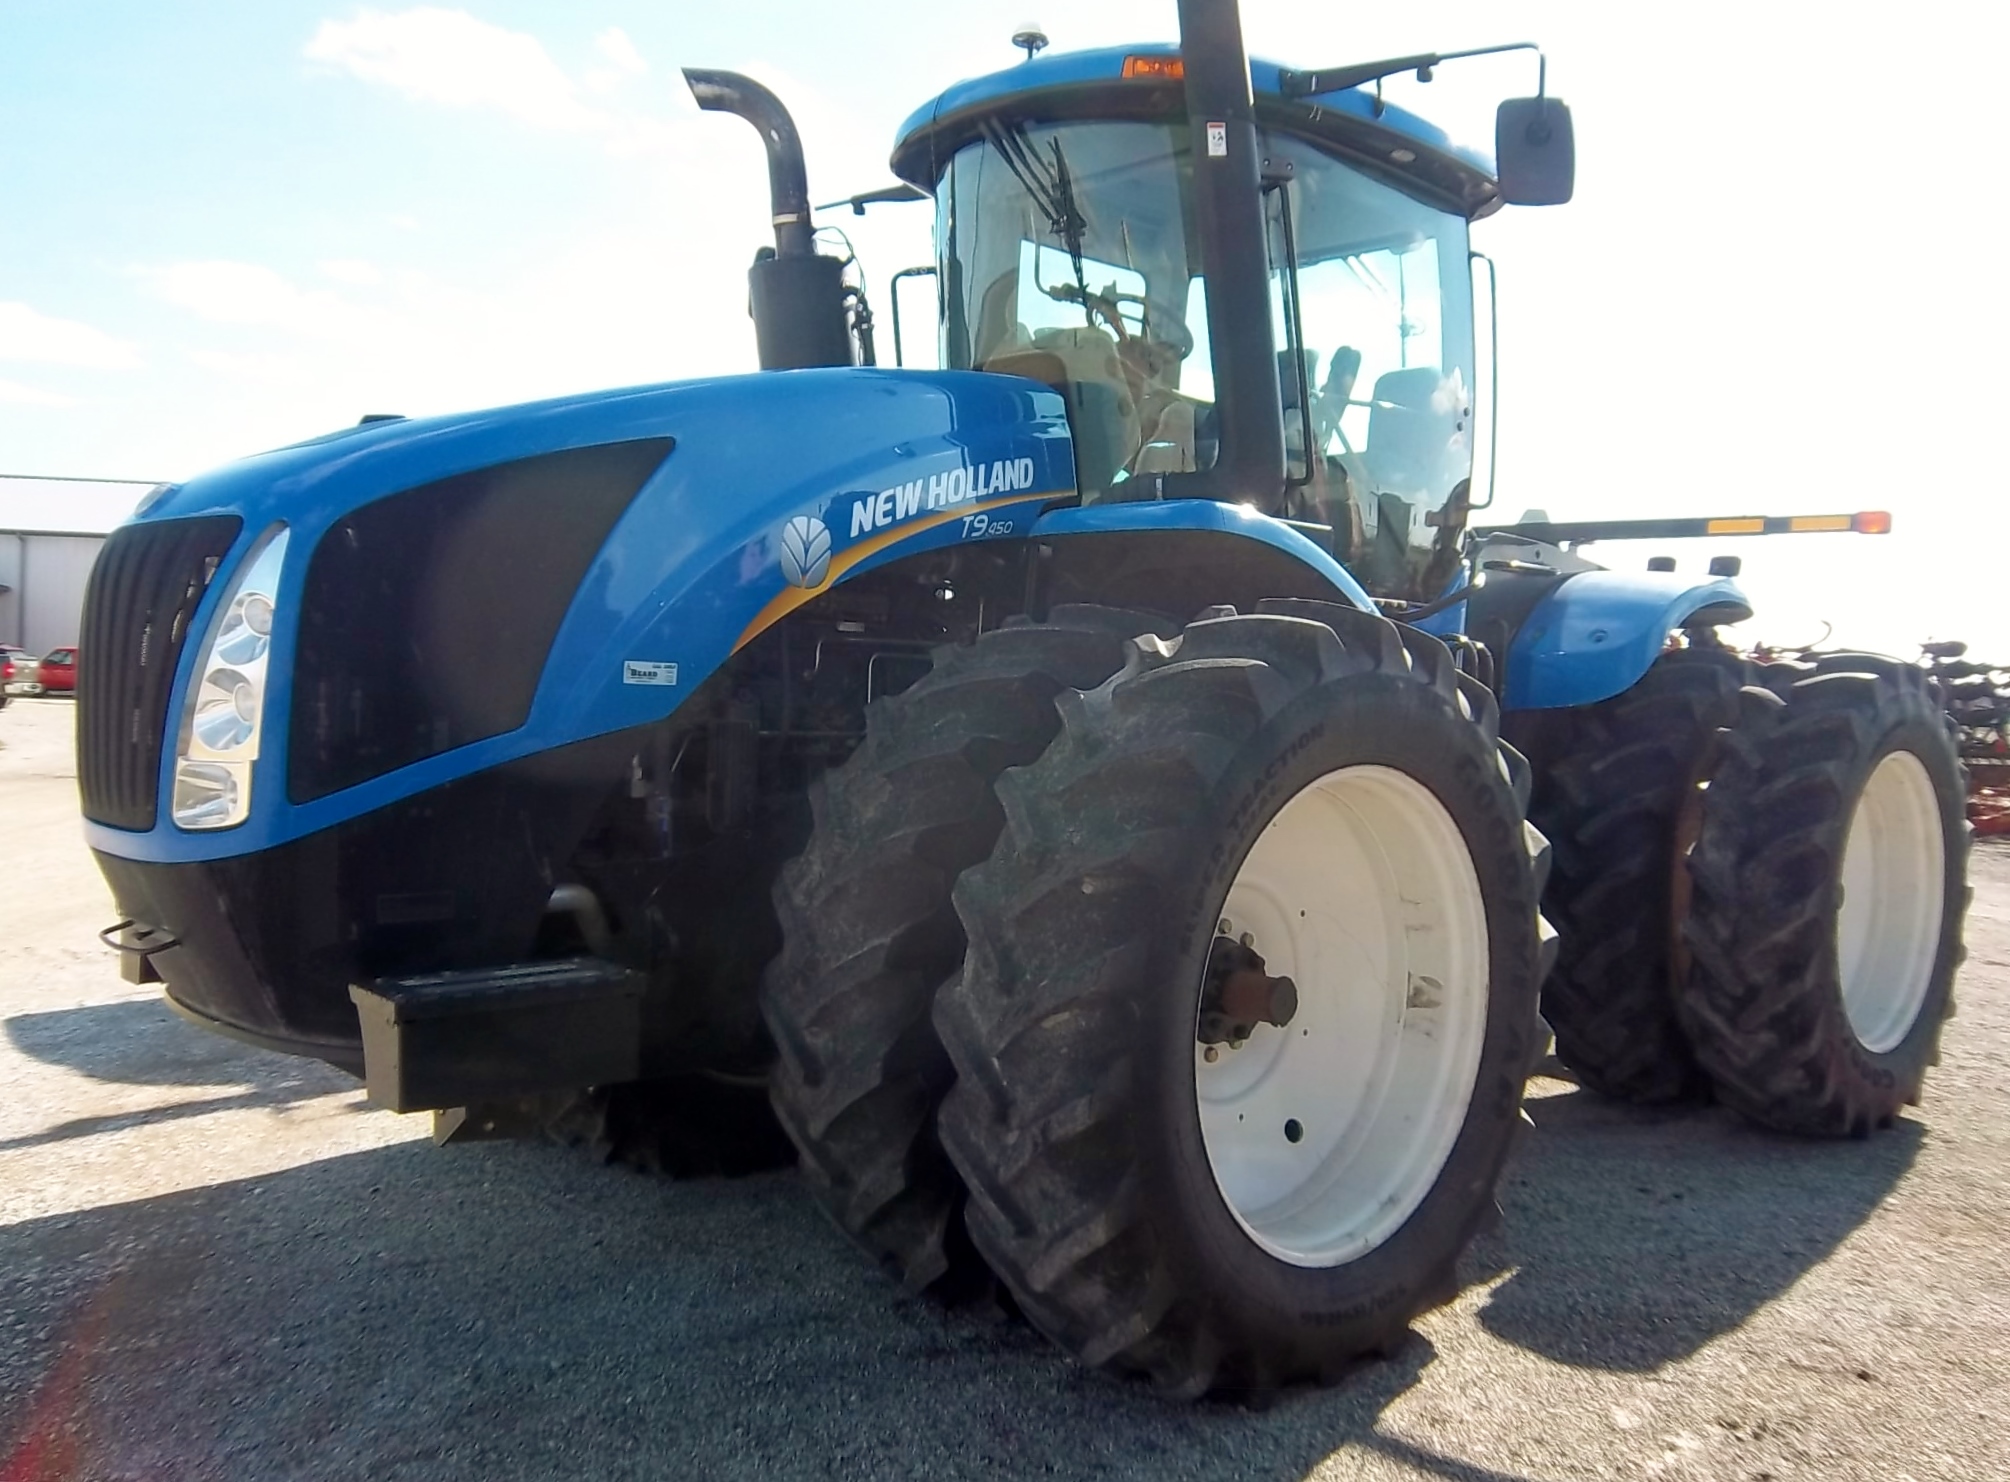 2012 New Holland T9.450 Tractor for sale in Hillsboro, IL | IronSearch